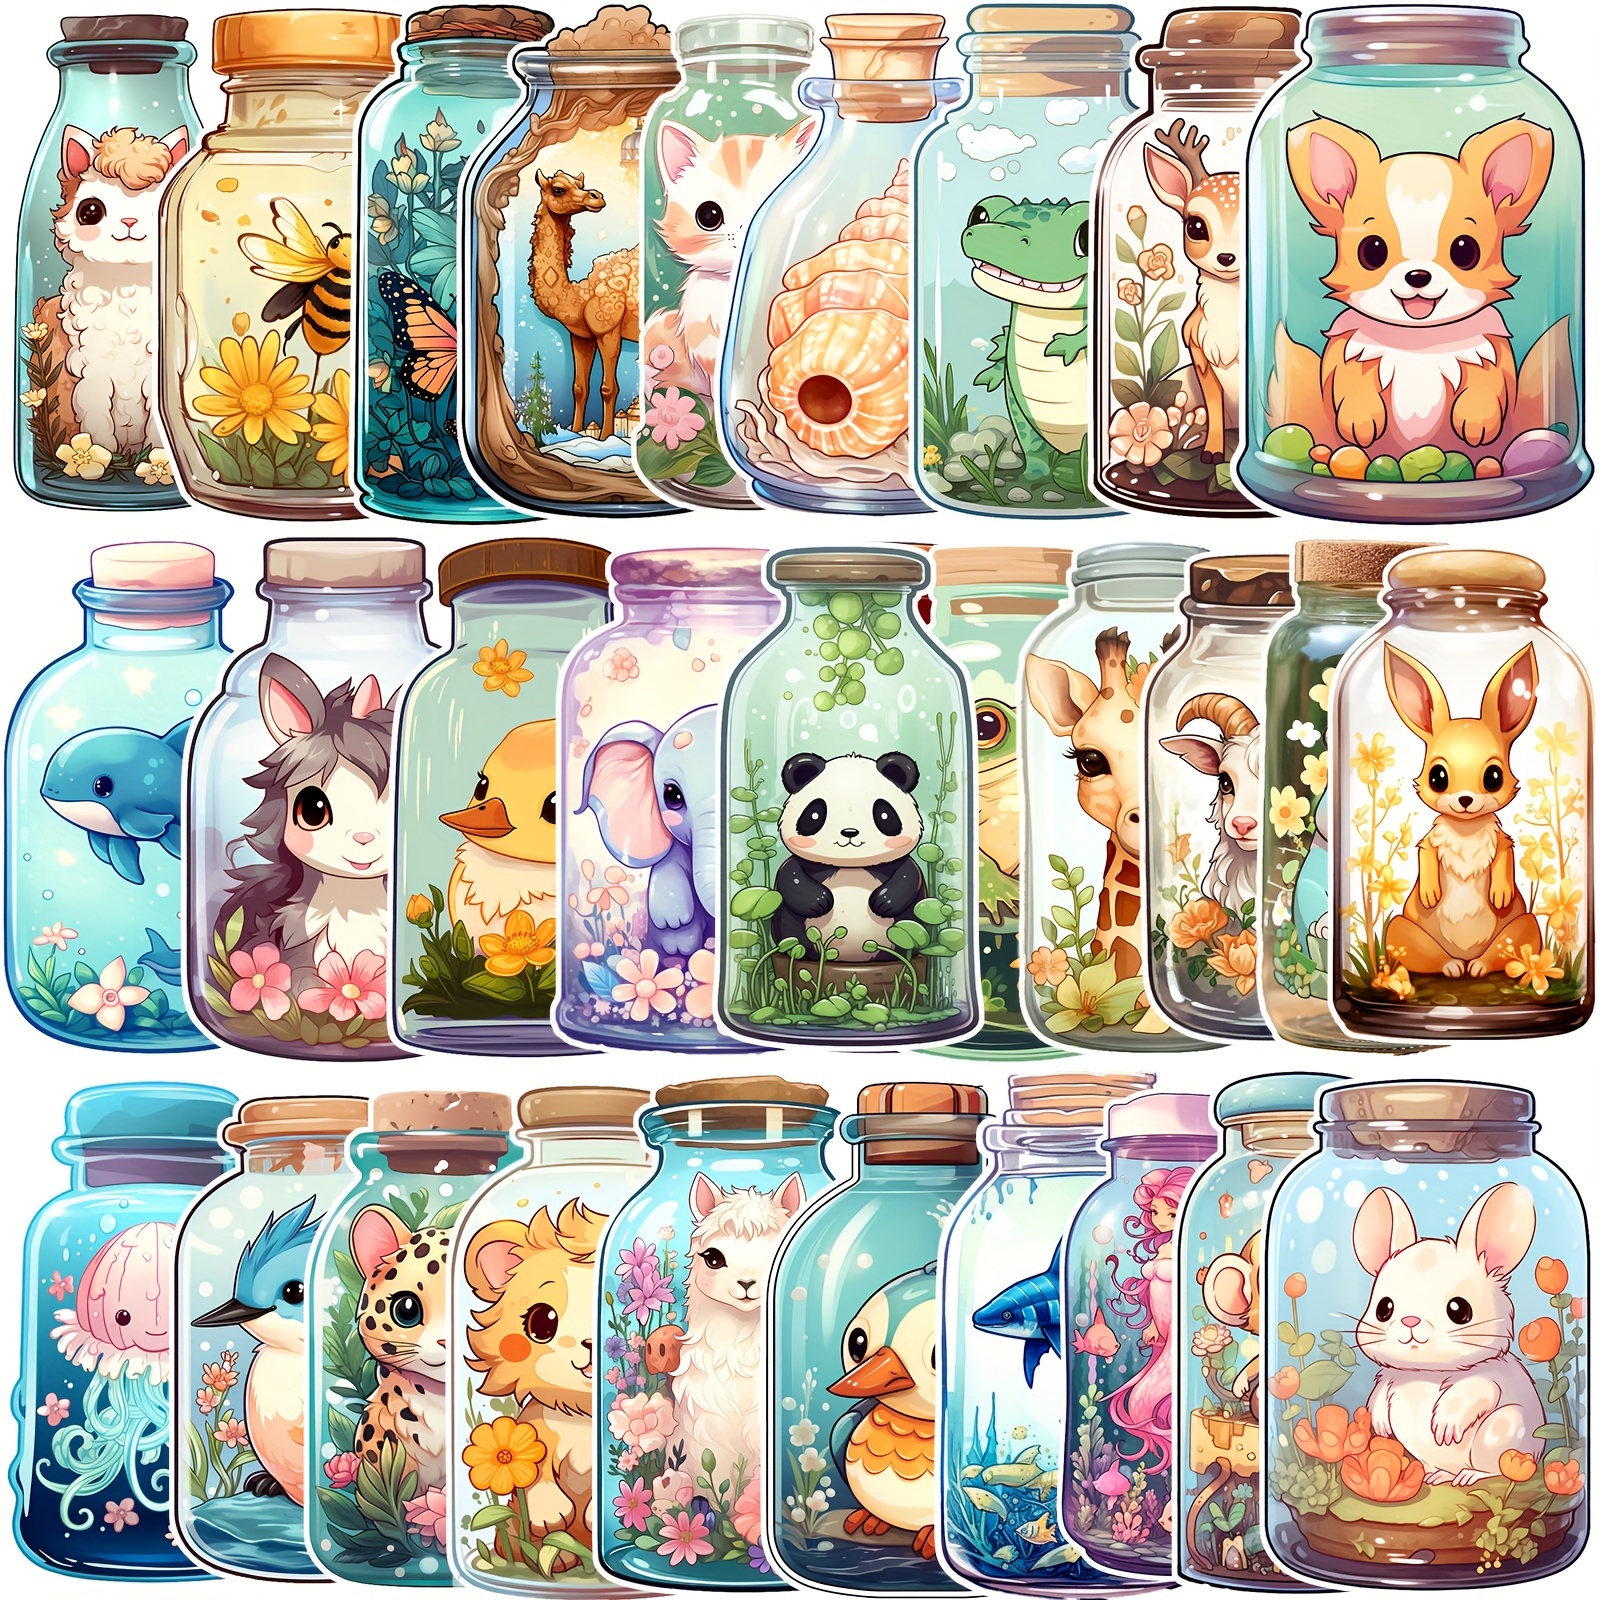 

52pcs Unique Bottle Pattern Stickers, Creative Animal Stickers, Cute Pretty Cool Aesthetics Cartoon Vinyl Waterproof Stickers, For Water Bottle, Pad, Phone, Laptop, Scrapbook And Luggage